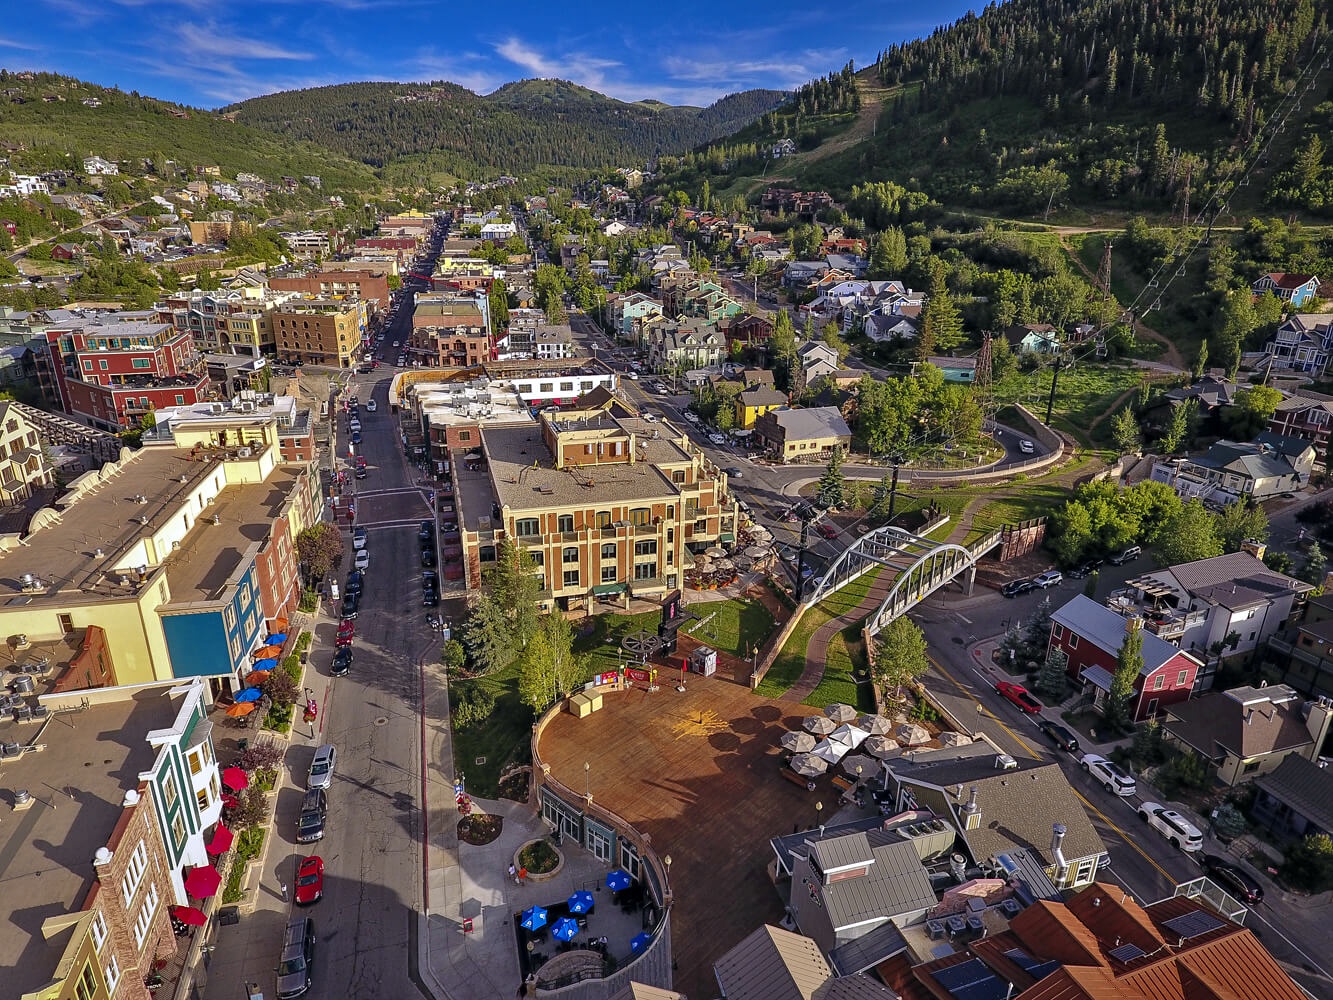 Main Street Park City and the Town Lift